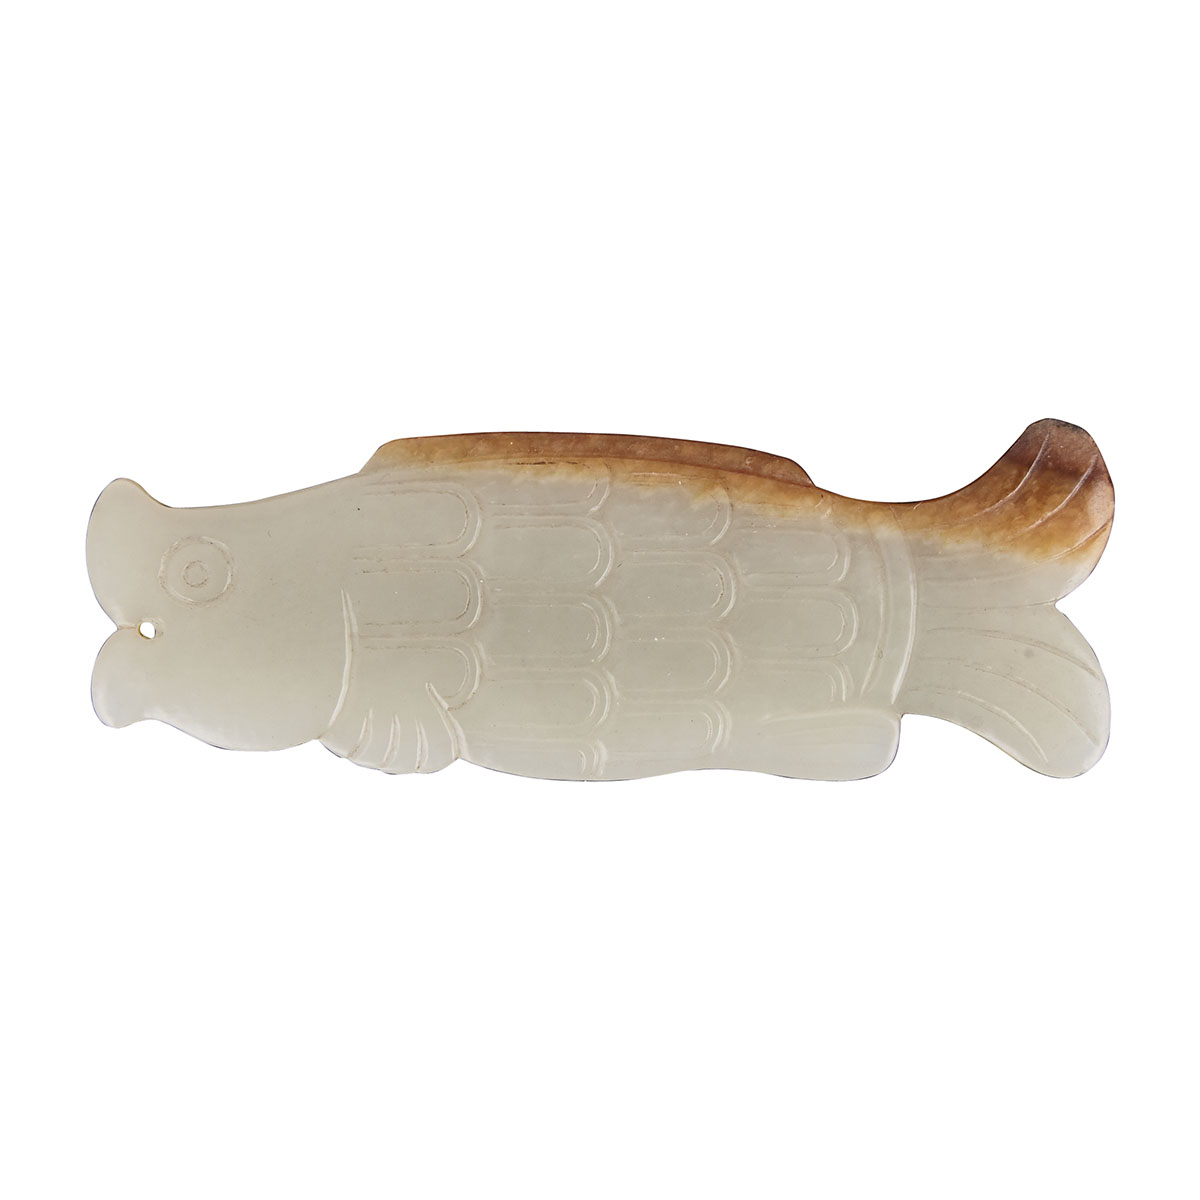 An Unusual Pale Yellow and Russet Jade Fish, Qing Dynasty, 18th Century